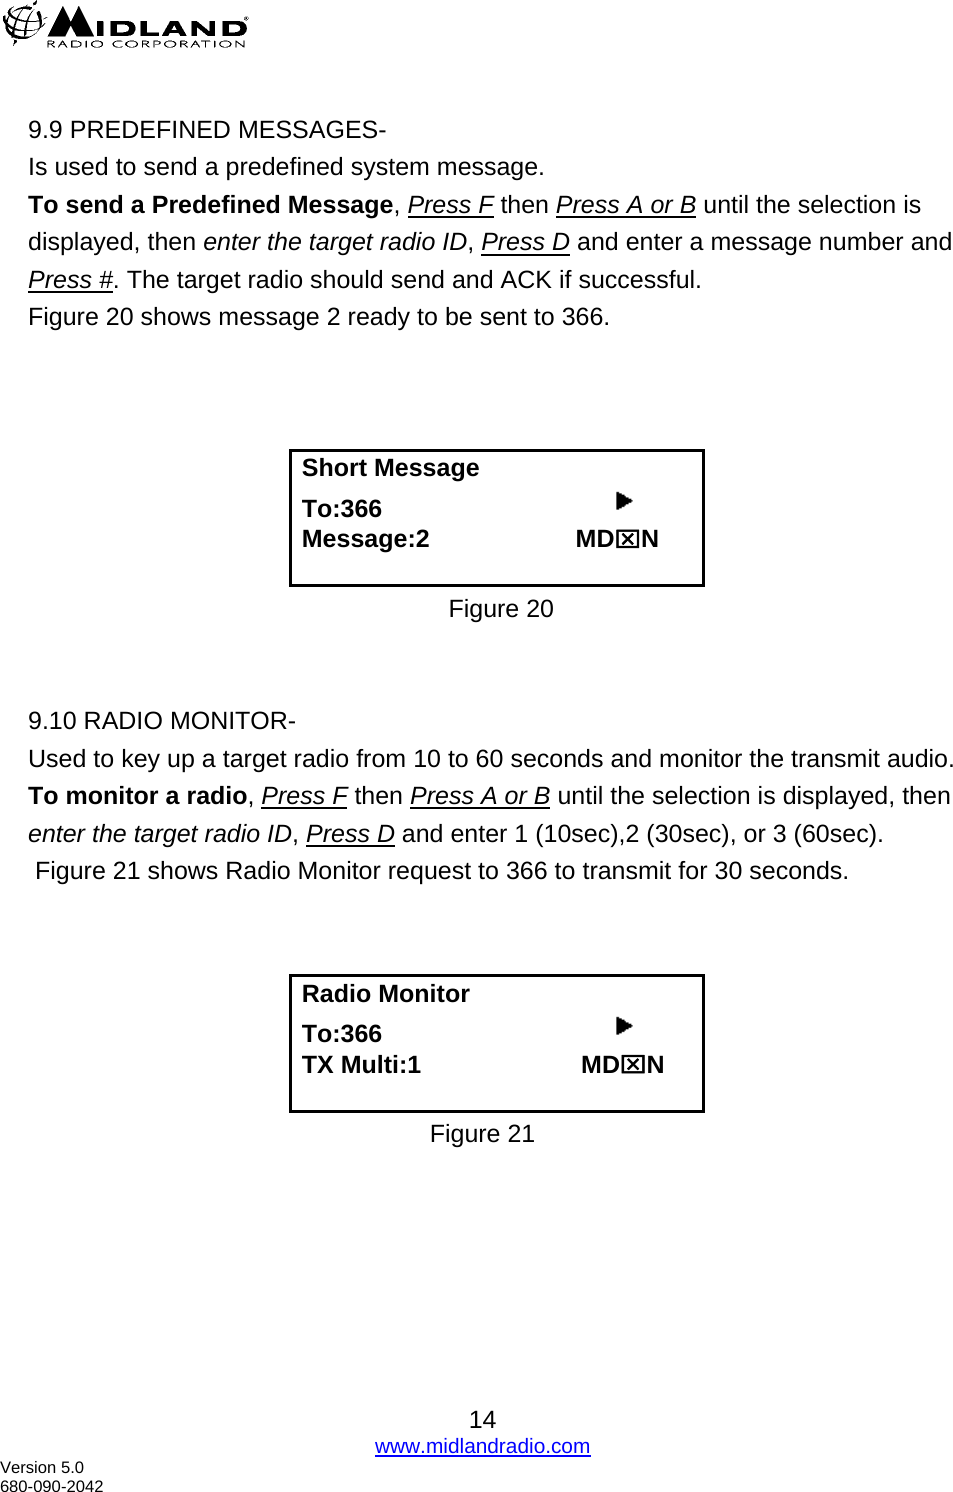   9.9 PREDEFINED MESSAGES- Is used to send a predefined system message.   To send a Predefined Message, Press F then Press A or B until the selection is displayed, then enter the target radio ID, Press D and enter a message number and Press #. The target radio should send and ACK if successful. Figure 20 shows message 2 ready to be sent to 366.     Short Message To:366                                      Message:2                     MD⌧N  Figure 20   9.10 RADIO MONITOR- Used to key up a target radio from 10 to 60 seconds and monitor the transmit audio. To monitor a radio, Press F then Press A or B until the selection is displayed, then enter the target radio ID, Press D and enter 1 (10sec),2 (30sec), or 3 (60sec).  Figure 21 shows Radio Monitor request to 366 to transmit for 30 seconds.    Radio Monitor To:366                                      TX Multi:1                       MD⌧N  Figure 21  14 www.midlandradio.com Version 5.0 680-090-2042 